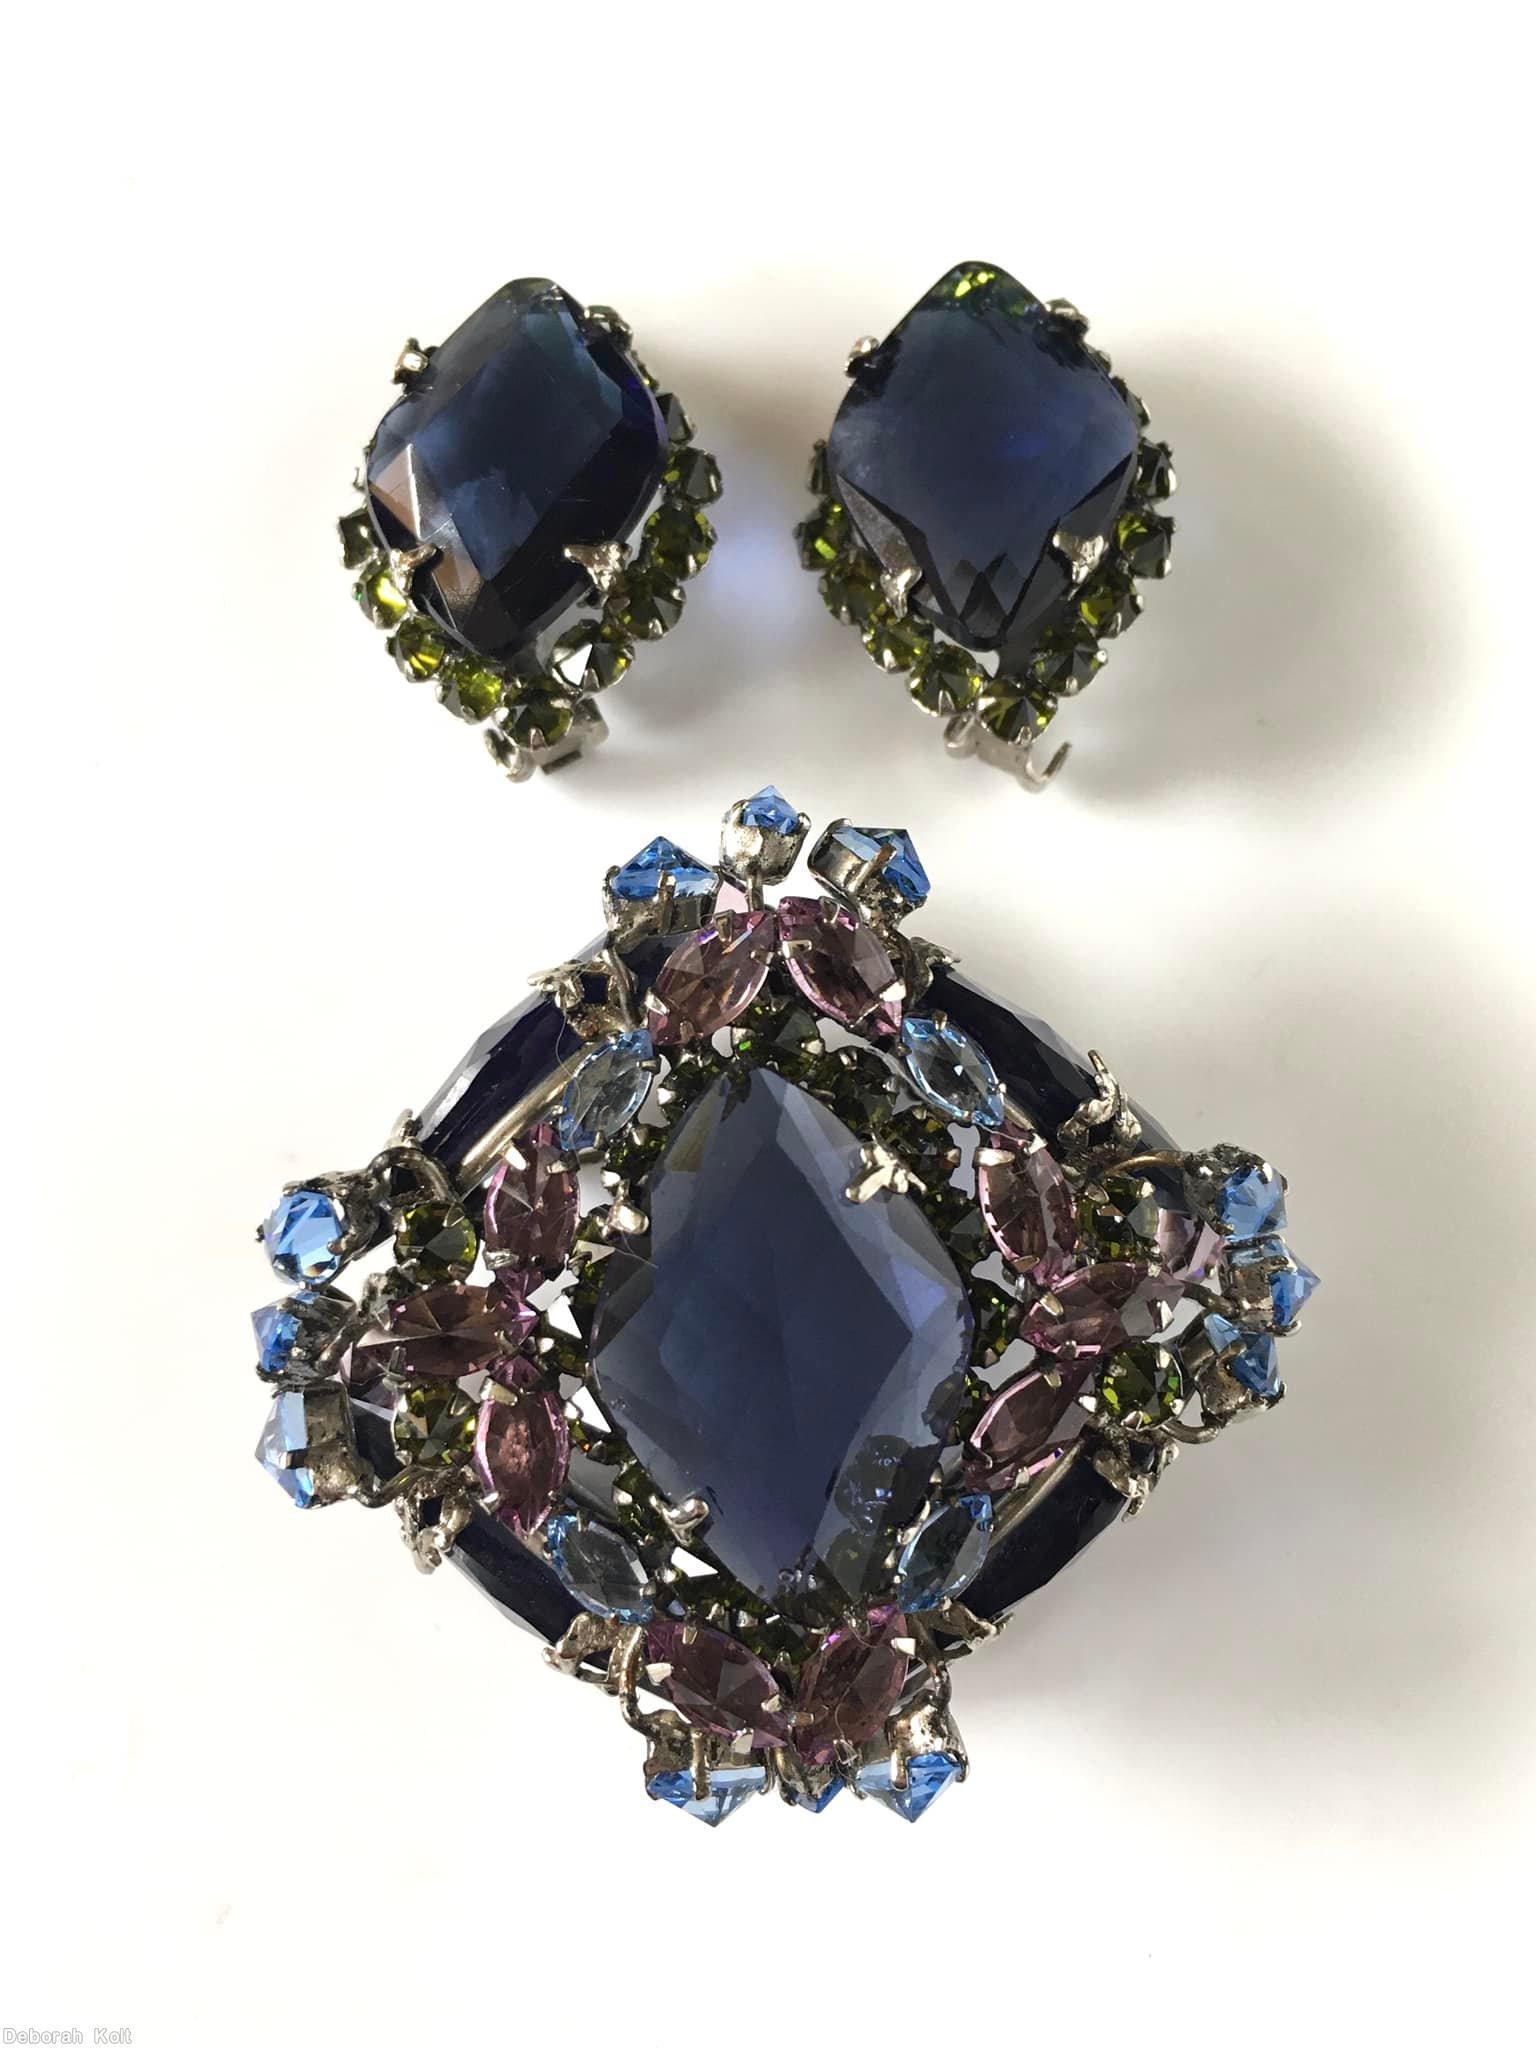 Schreiner large diamond faceted center high domed square pin 4 large side navy large diamond shaped faceted stone peridot chaton blue small navette lavender small navette jewelry